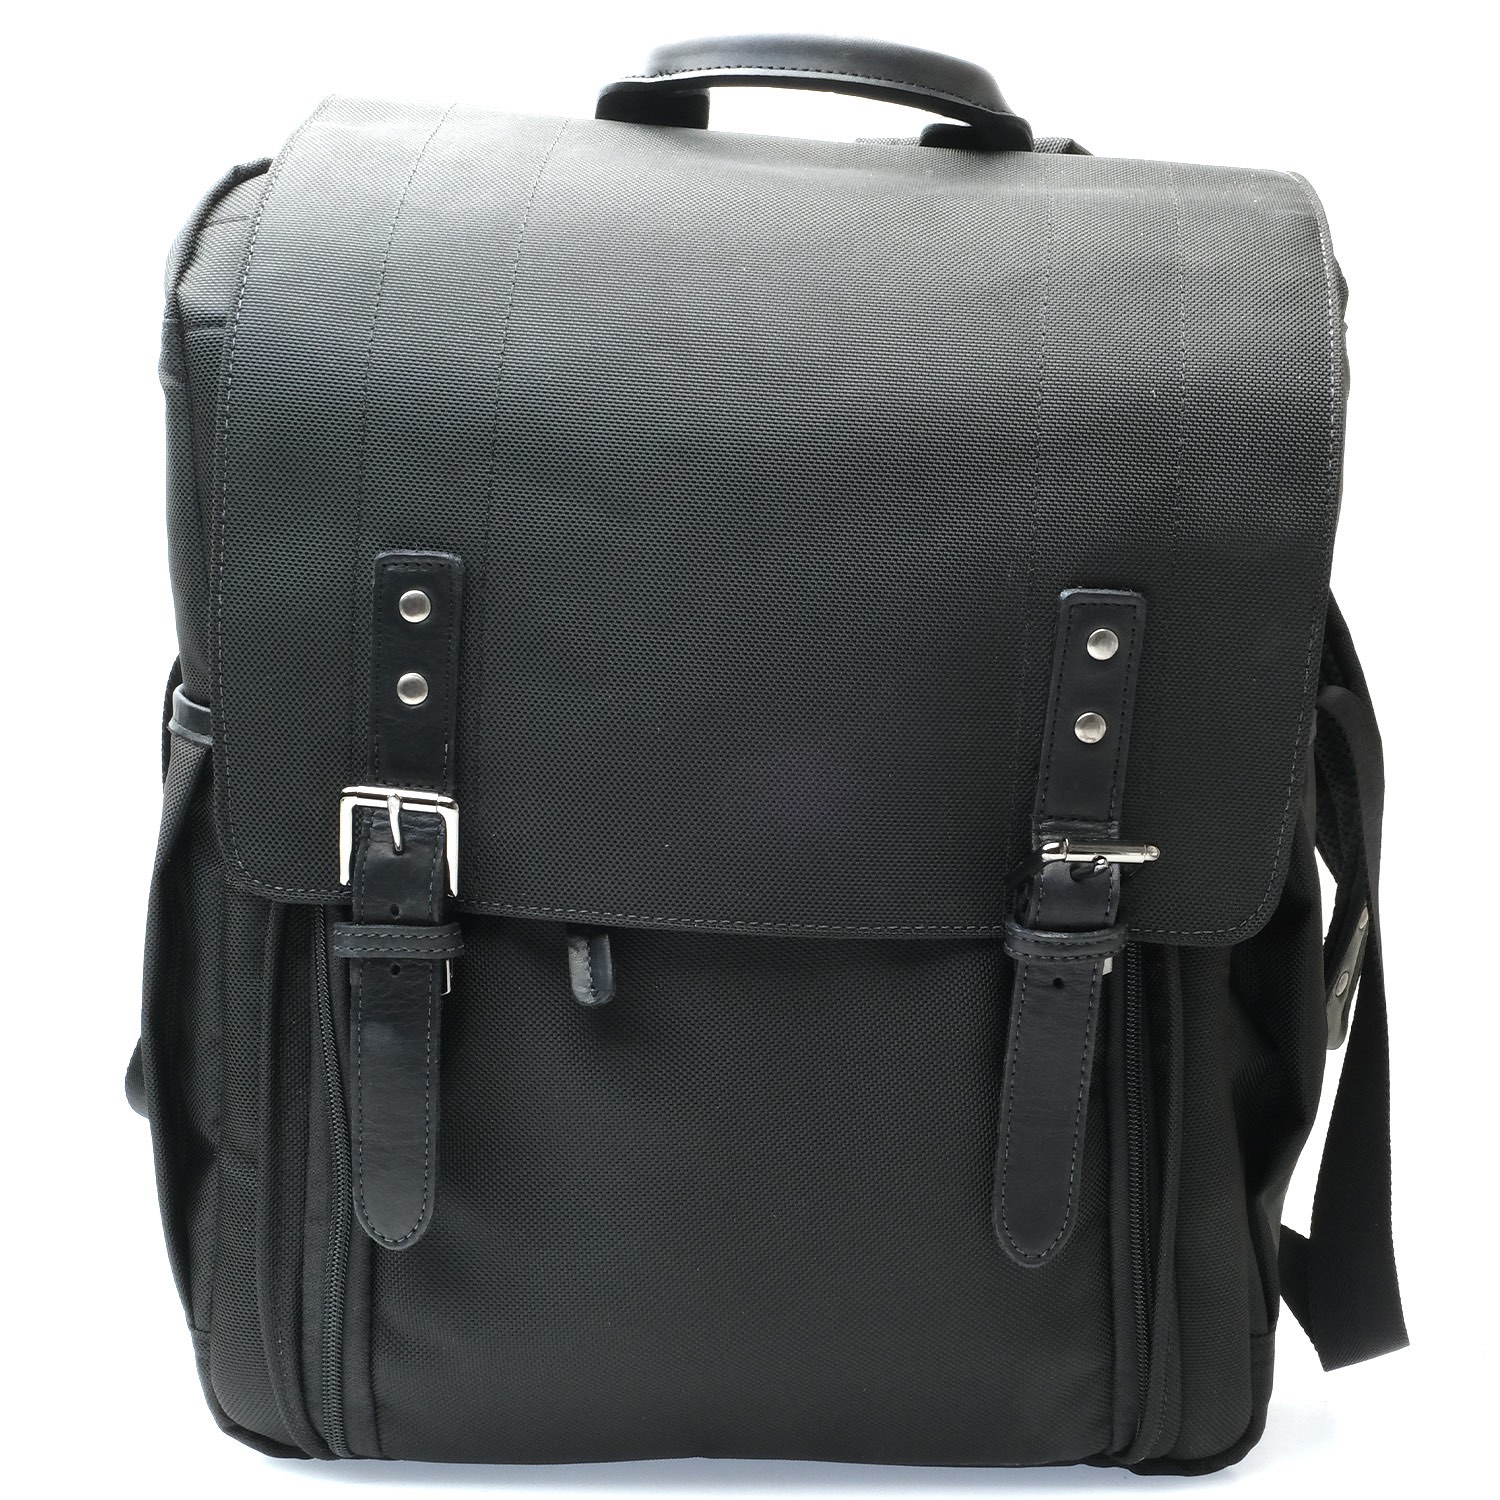 ONA Camps Bay Camera and Laptop Backpack Black (9+)